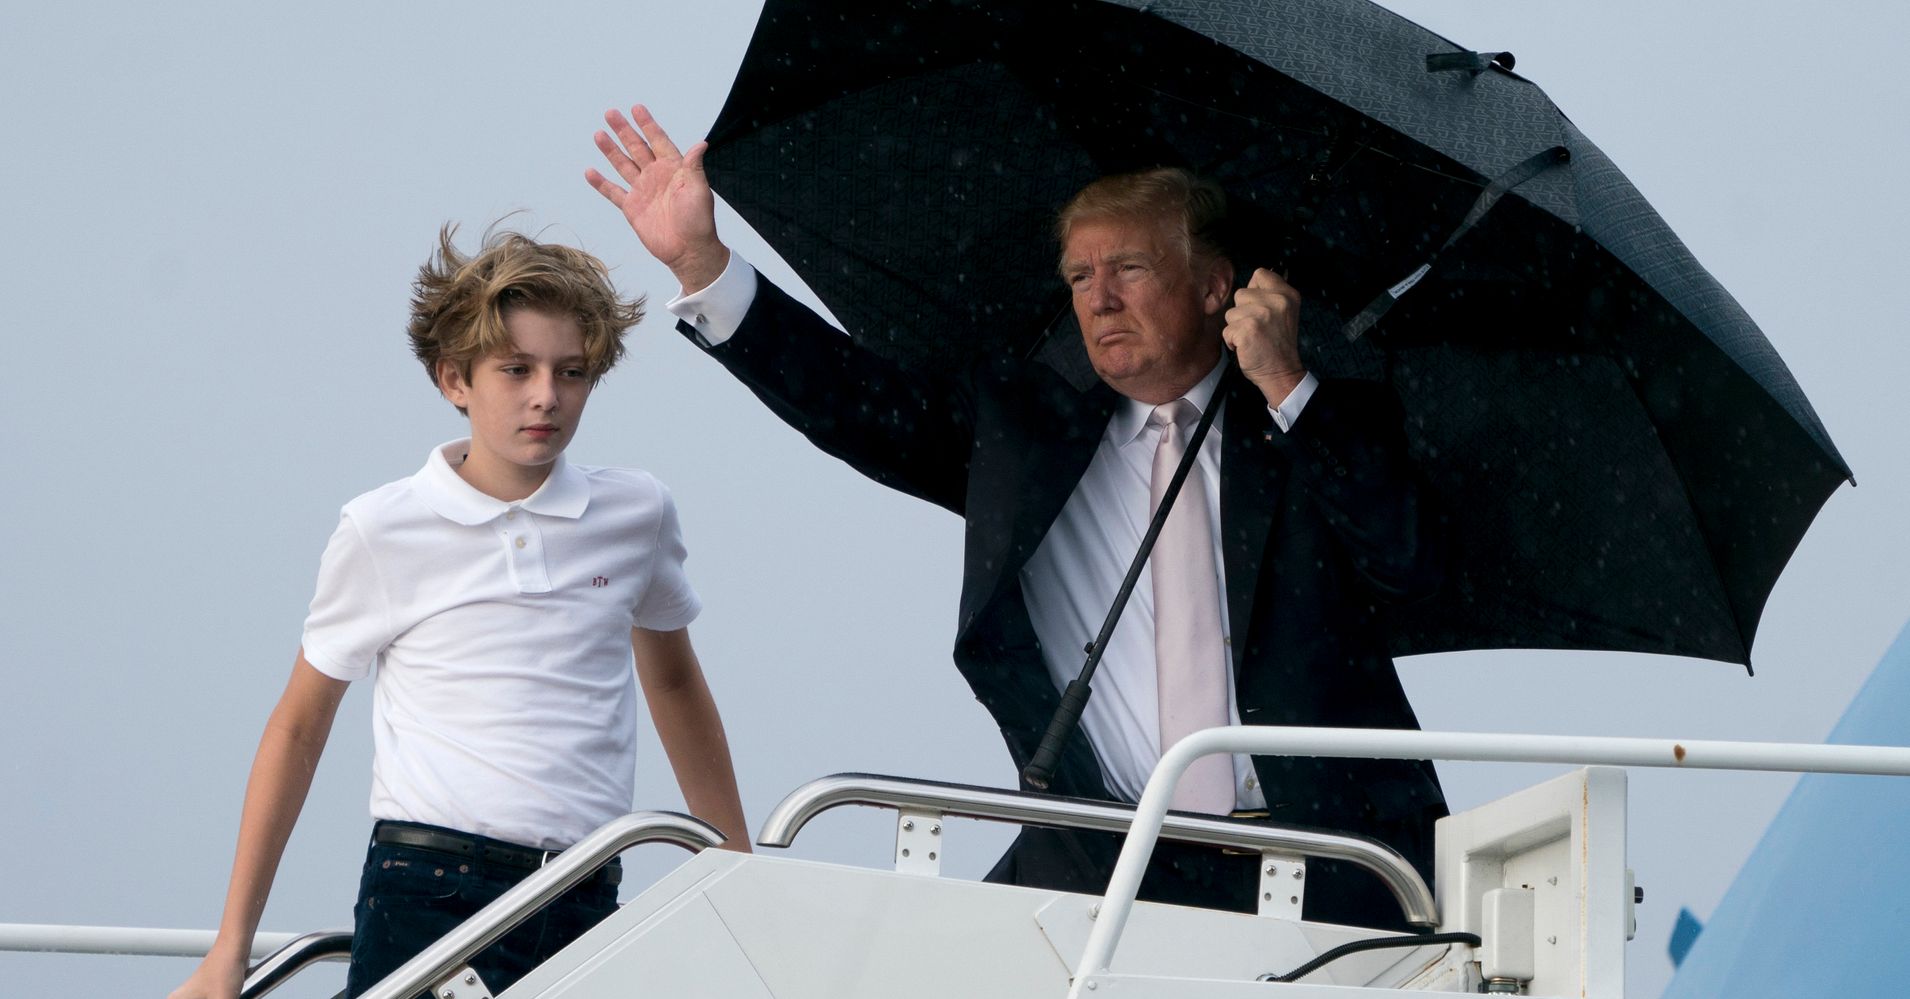 Trump Says He Would 'Have A Hard Time' If Son Barron Played Football